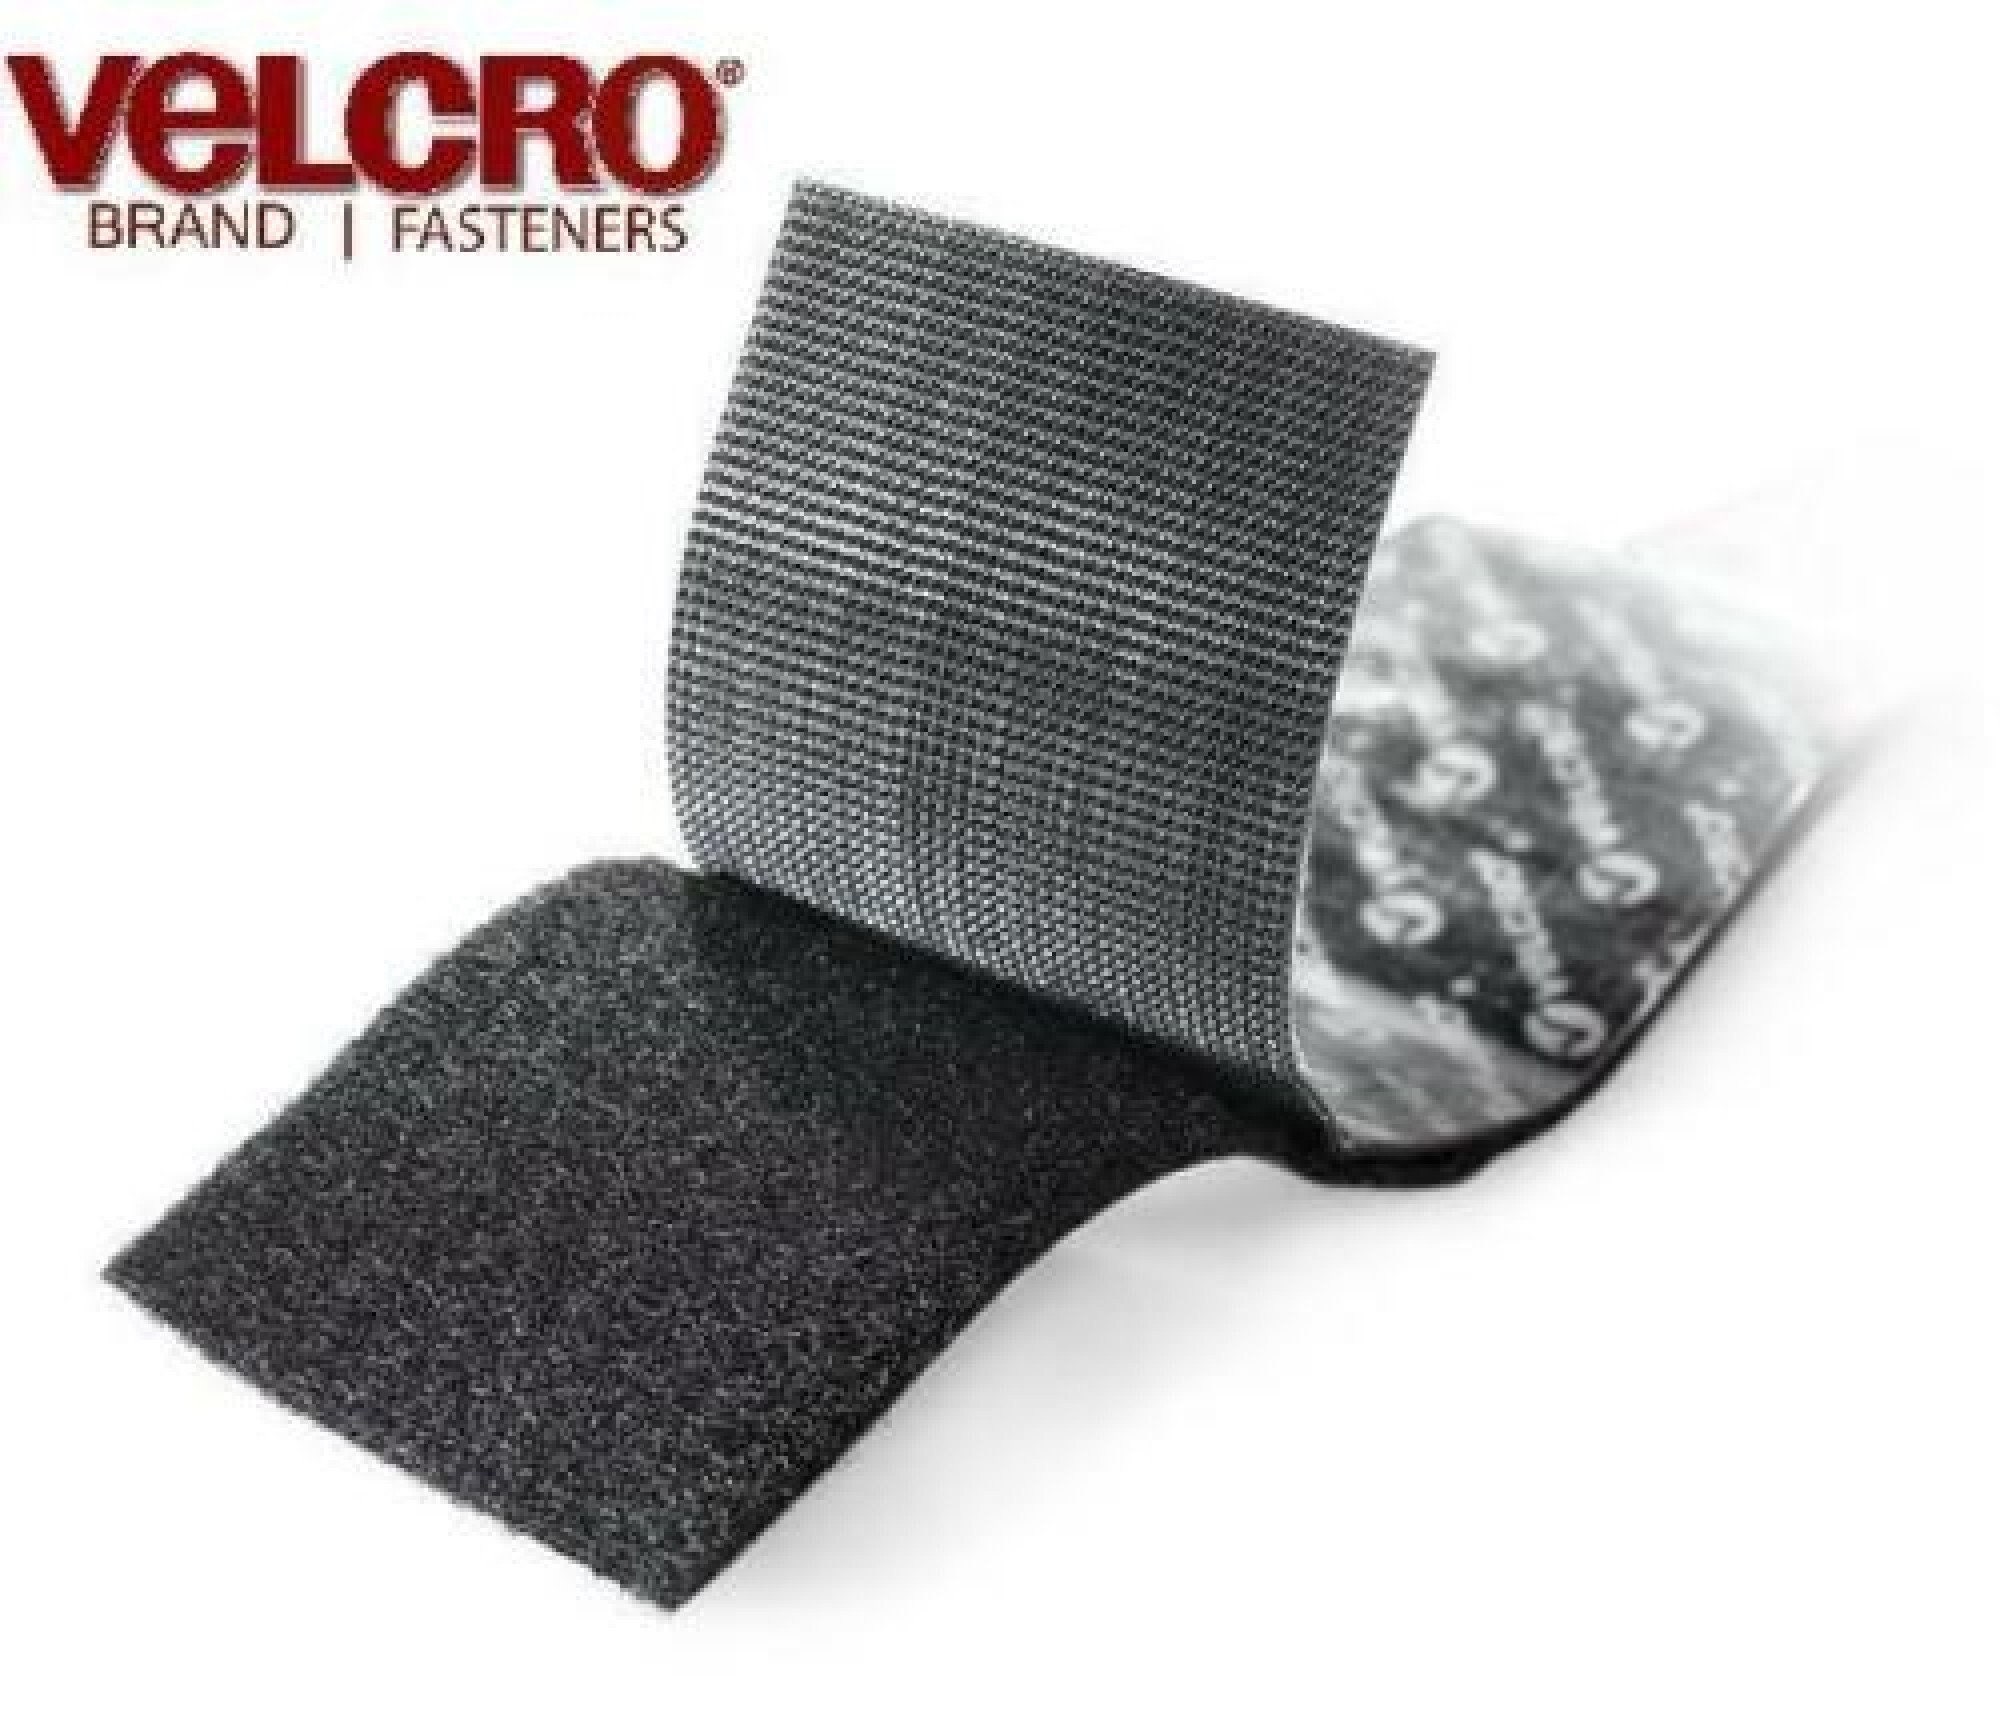 Fabric VELCRO R BRAND Fasteners Sticky Back for Tape 4x6 Black for